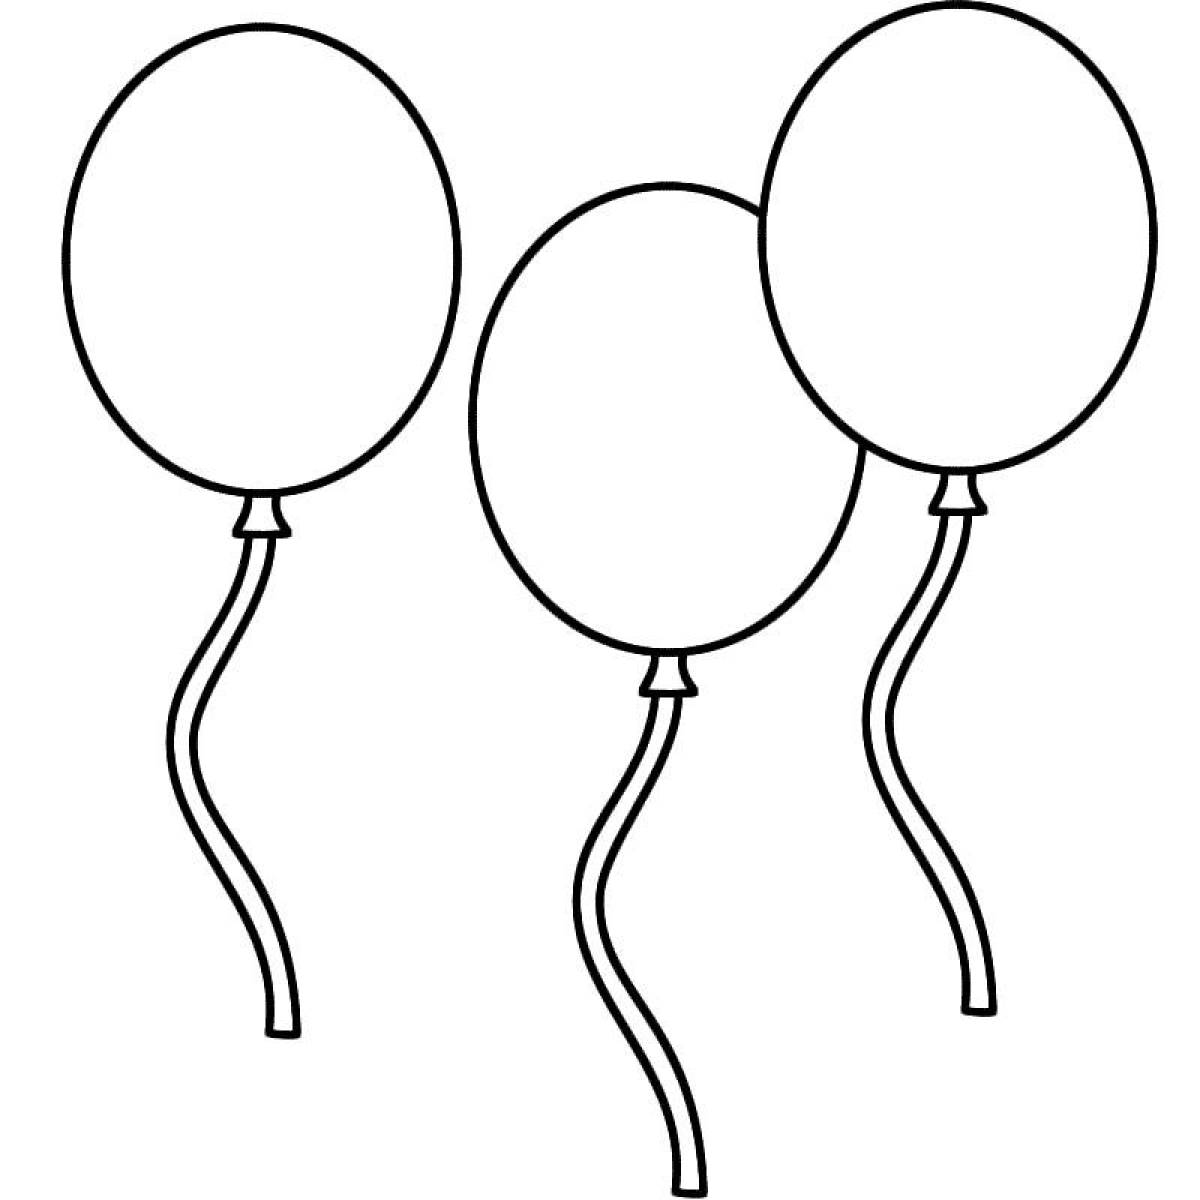 Coloring for bright balloons for children